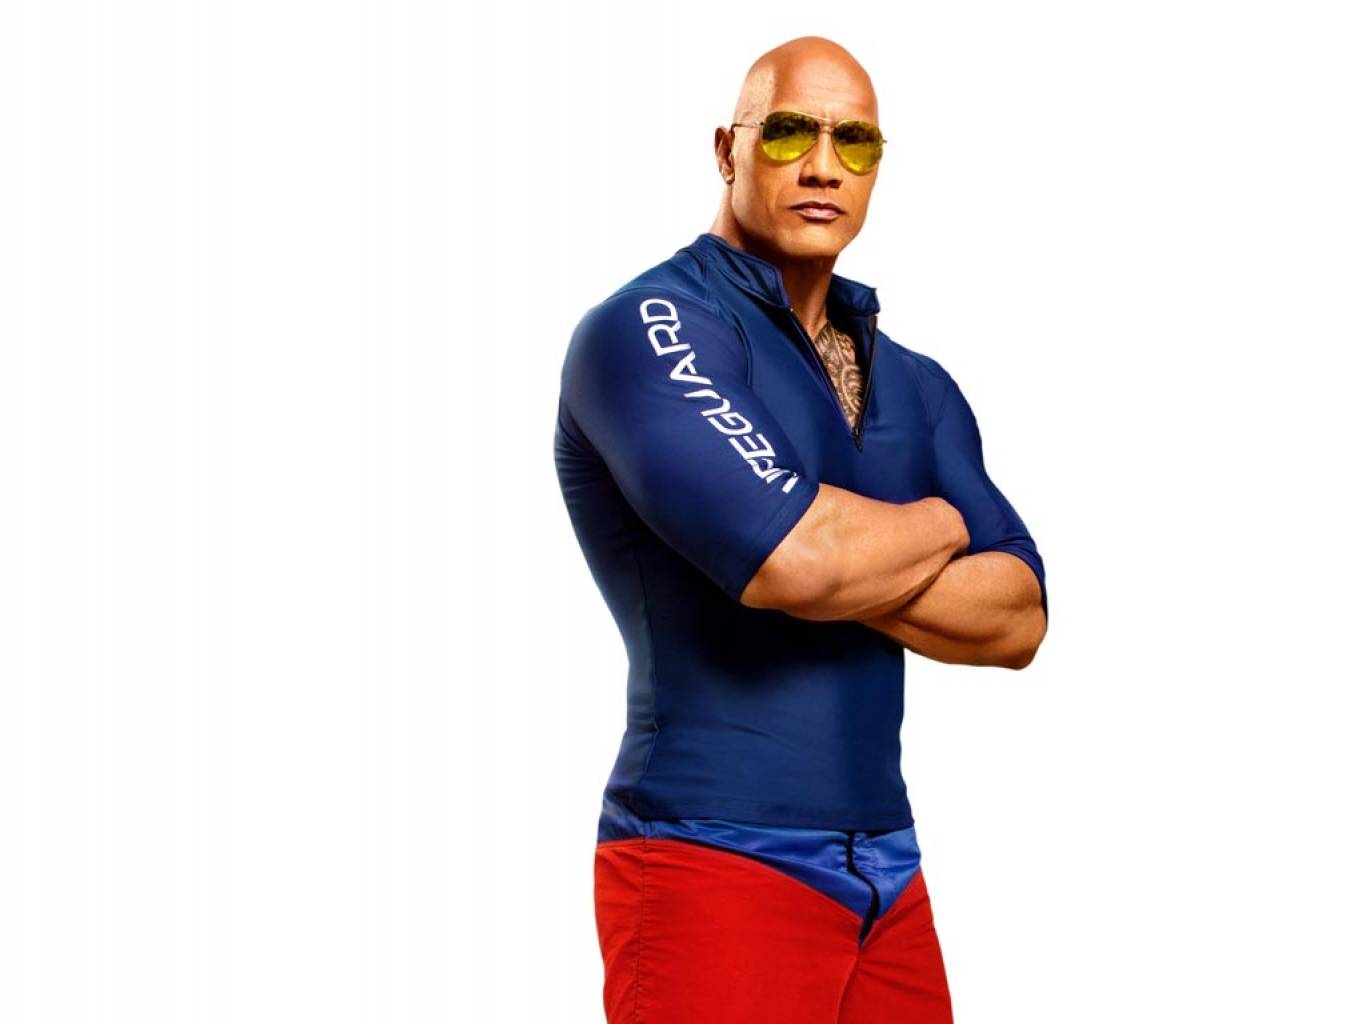 Baywatch 2017 Movie Wallpapers